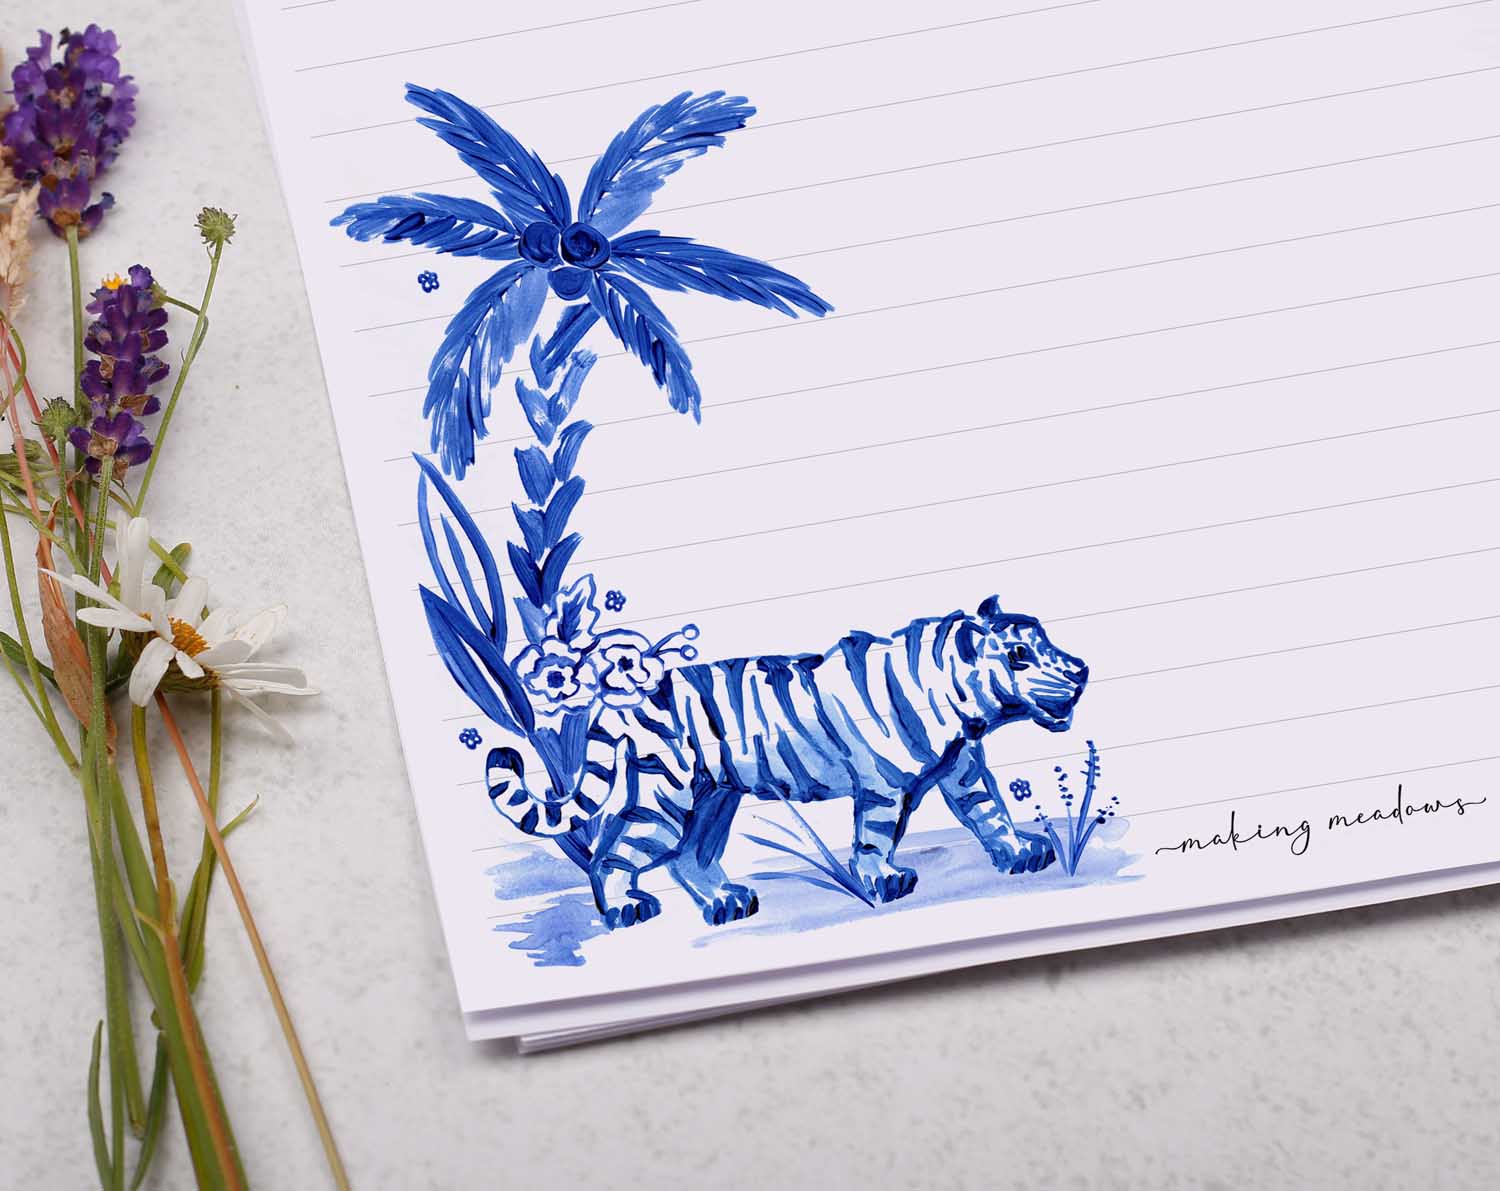 A4 letter writing paper sheets with a tiger and a palm tree blue watercolour border cascading around the letter paper edge.